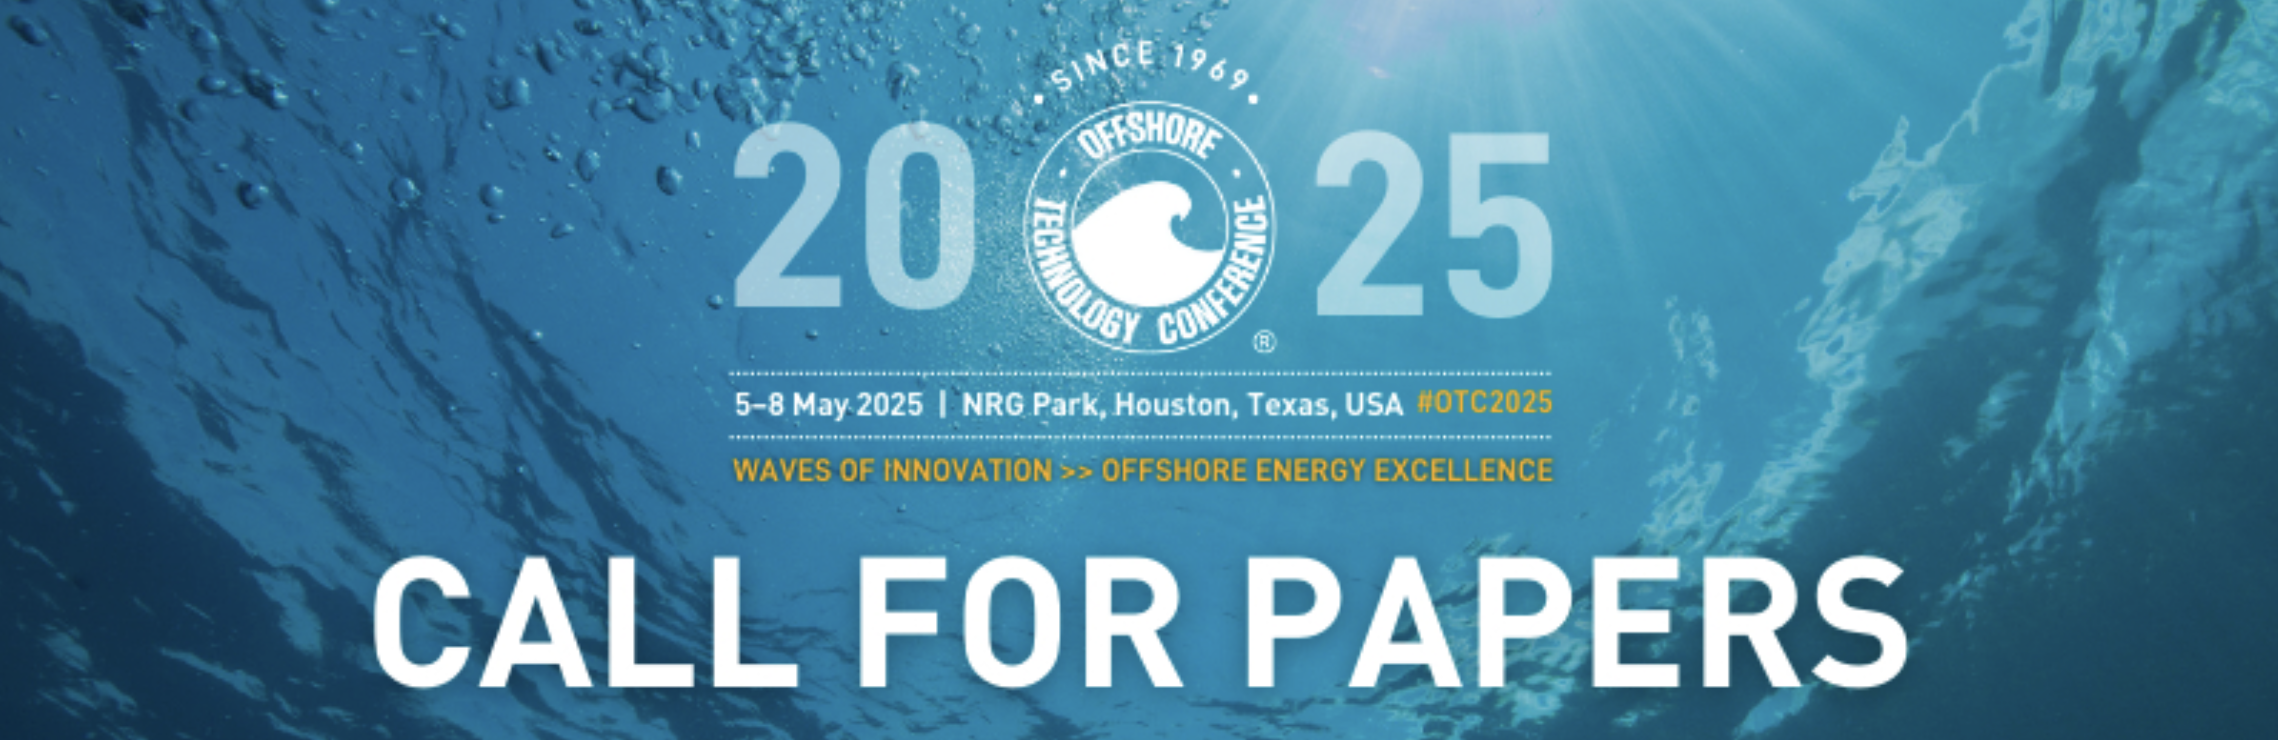 OTC 2025 Call for Papers